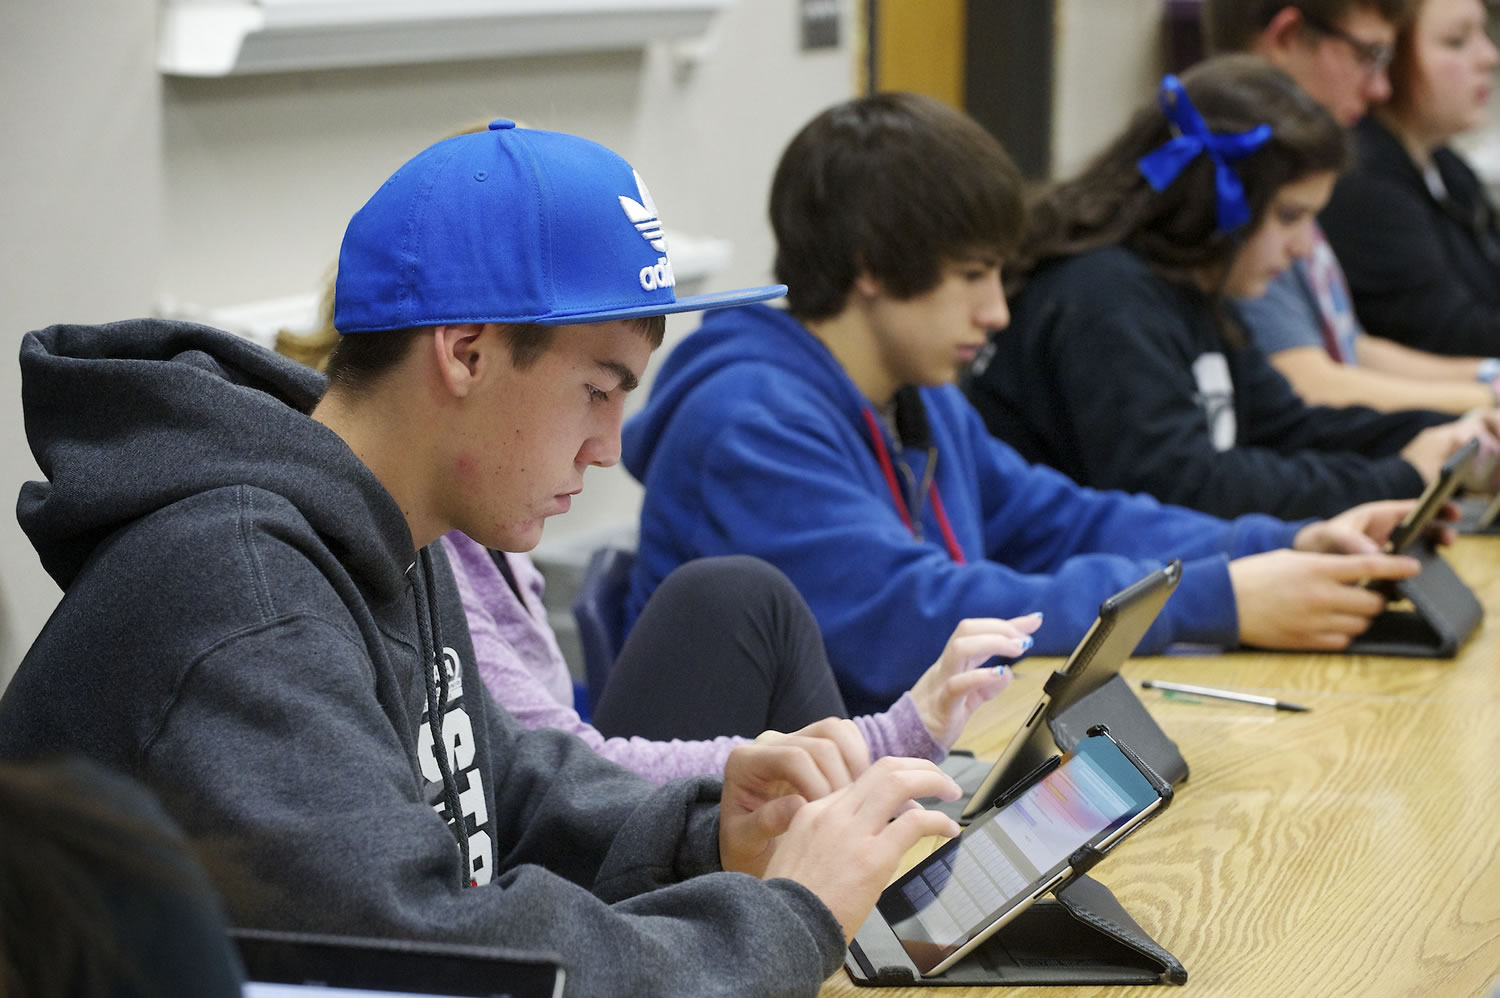 La Center High School student Alex Firl, 15, takes an assessment exam in Spanish class using an iPad Friday.